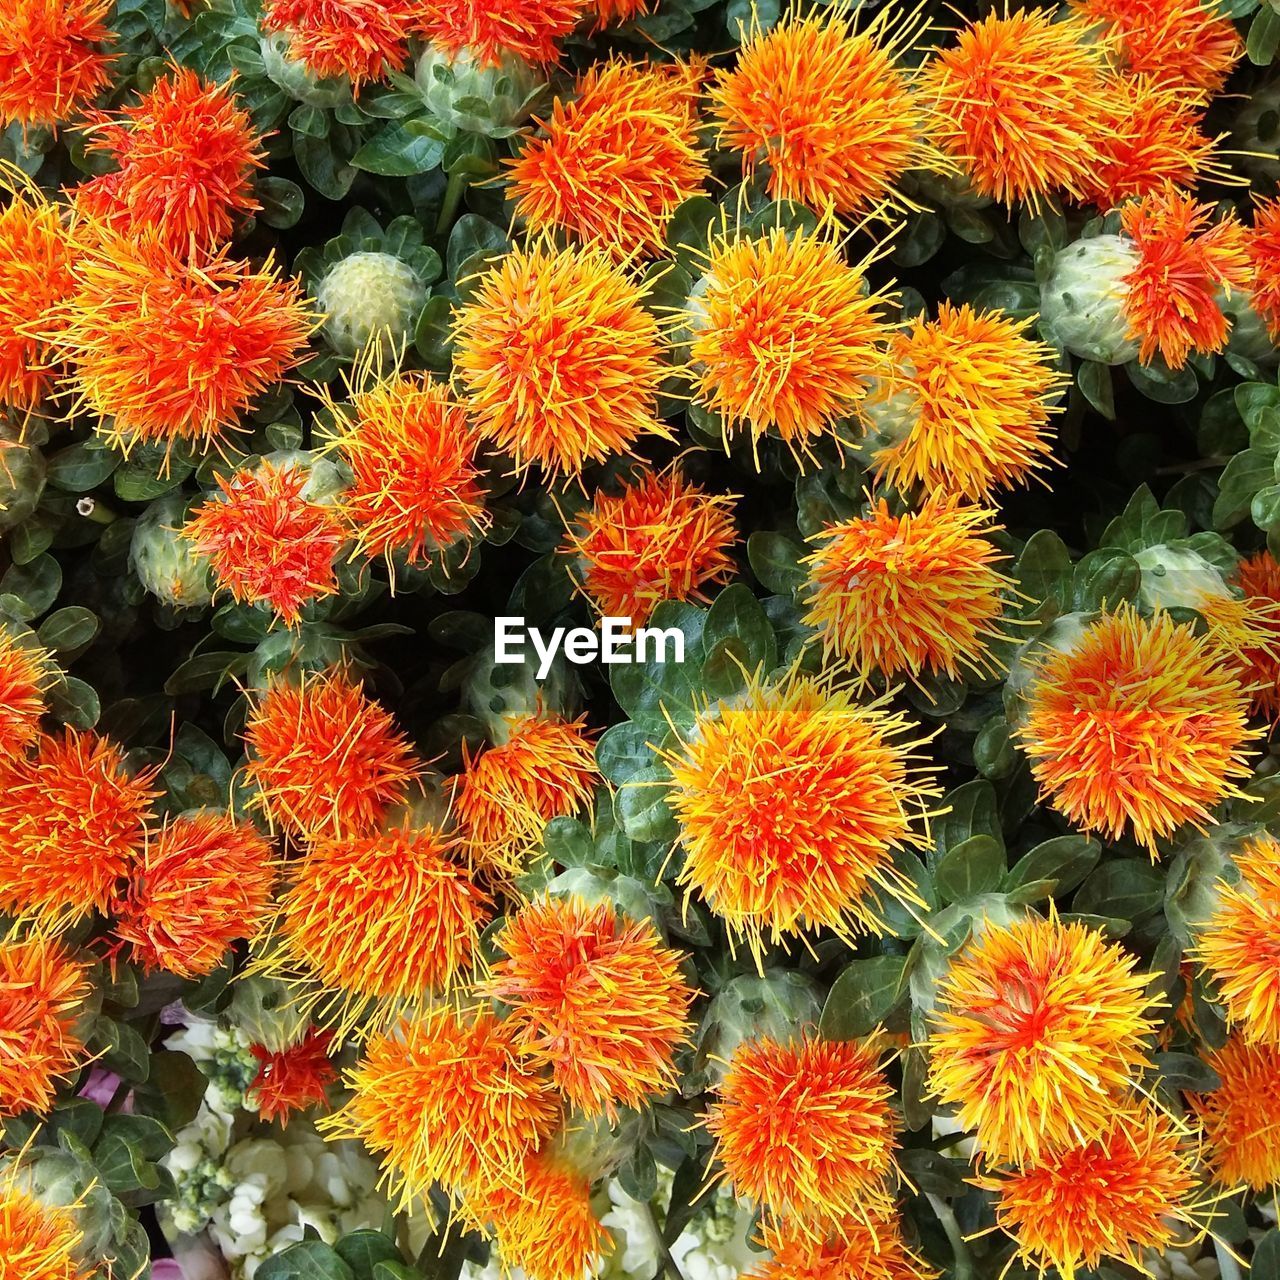 CLOSE-UP OF ORANGE FLOWERS BLOOMING OUTDOORS